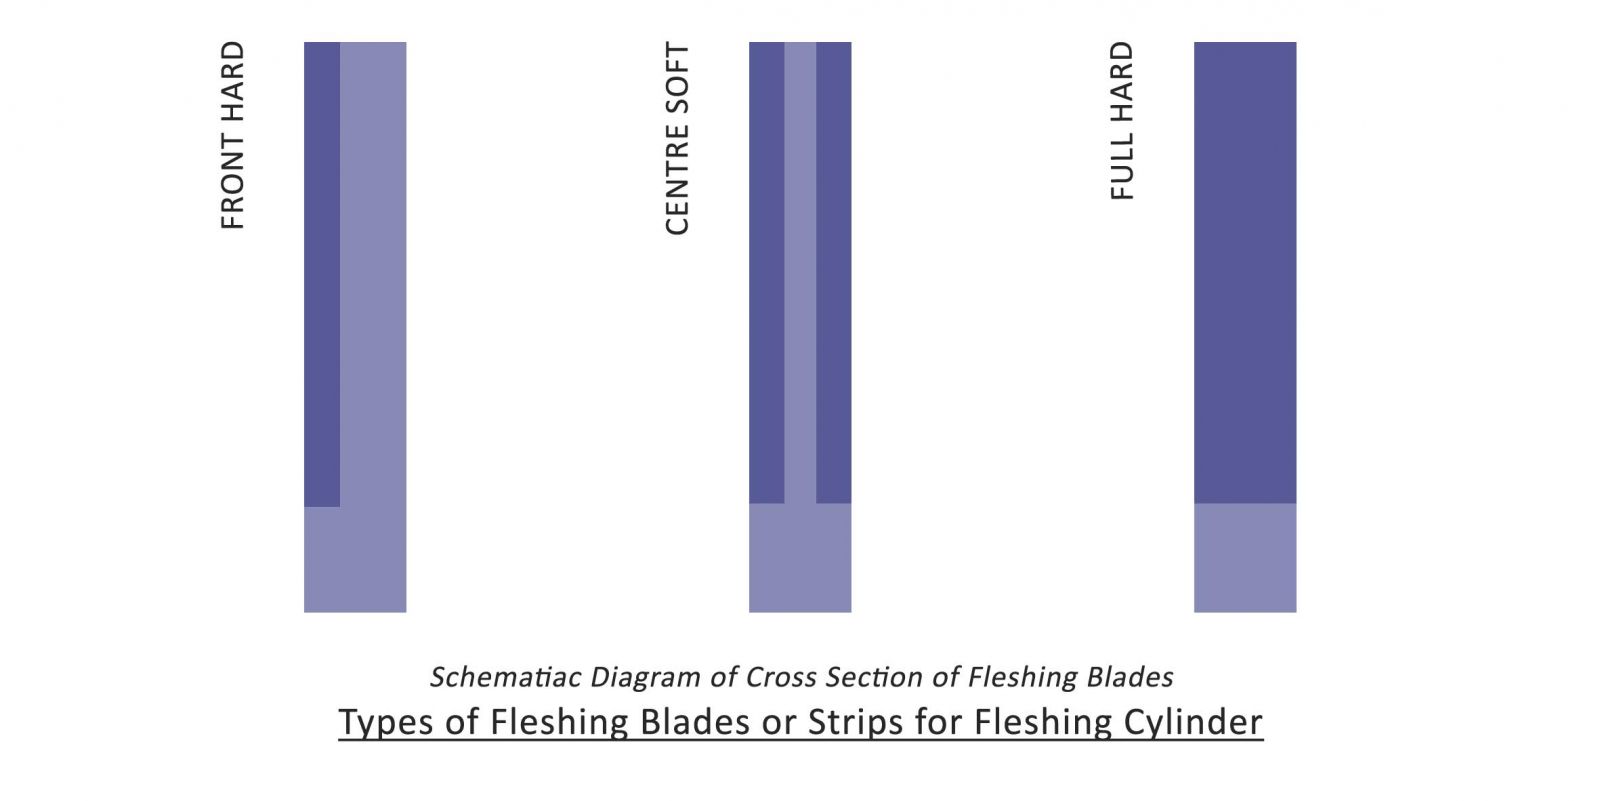 Types of Fleshing Blades or Strips for Fleshing Cylinder